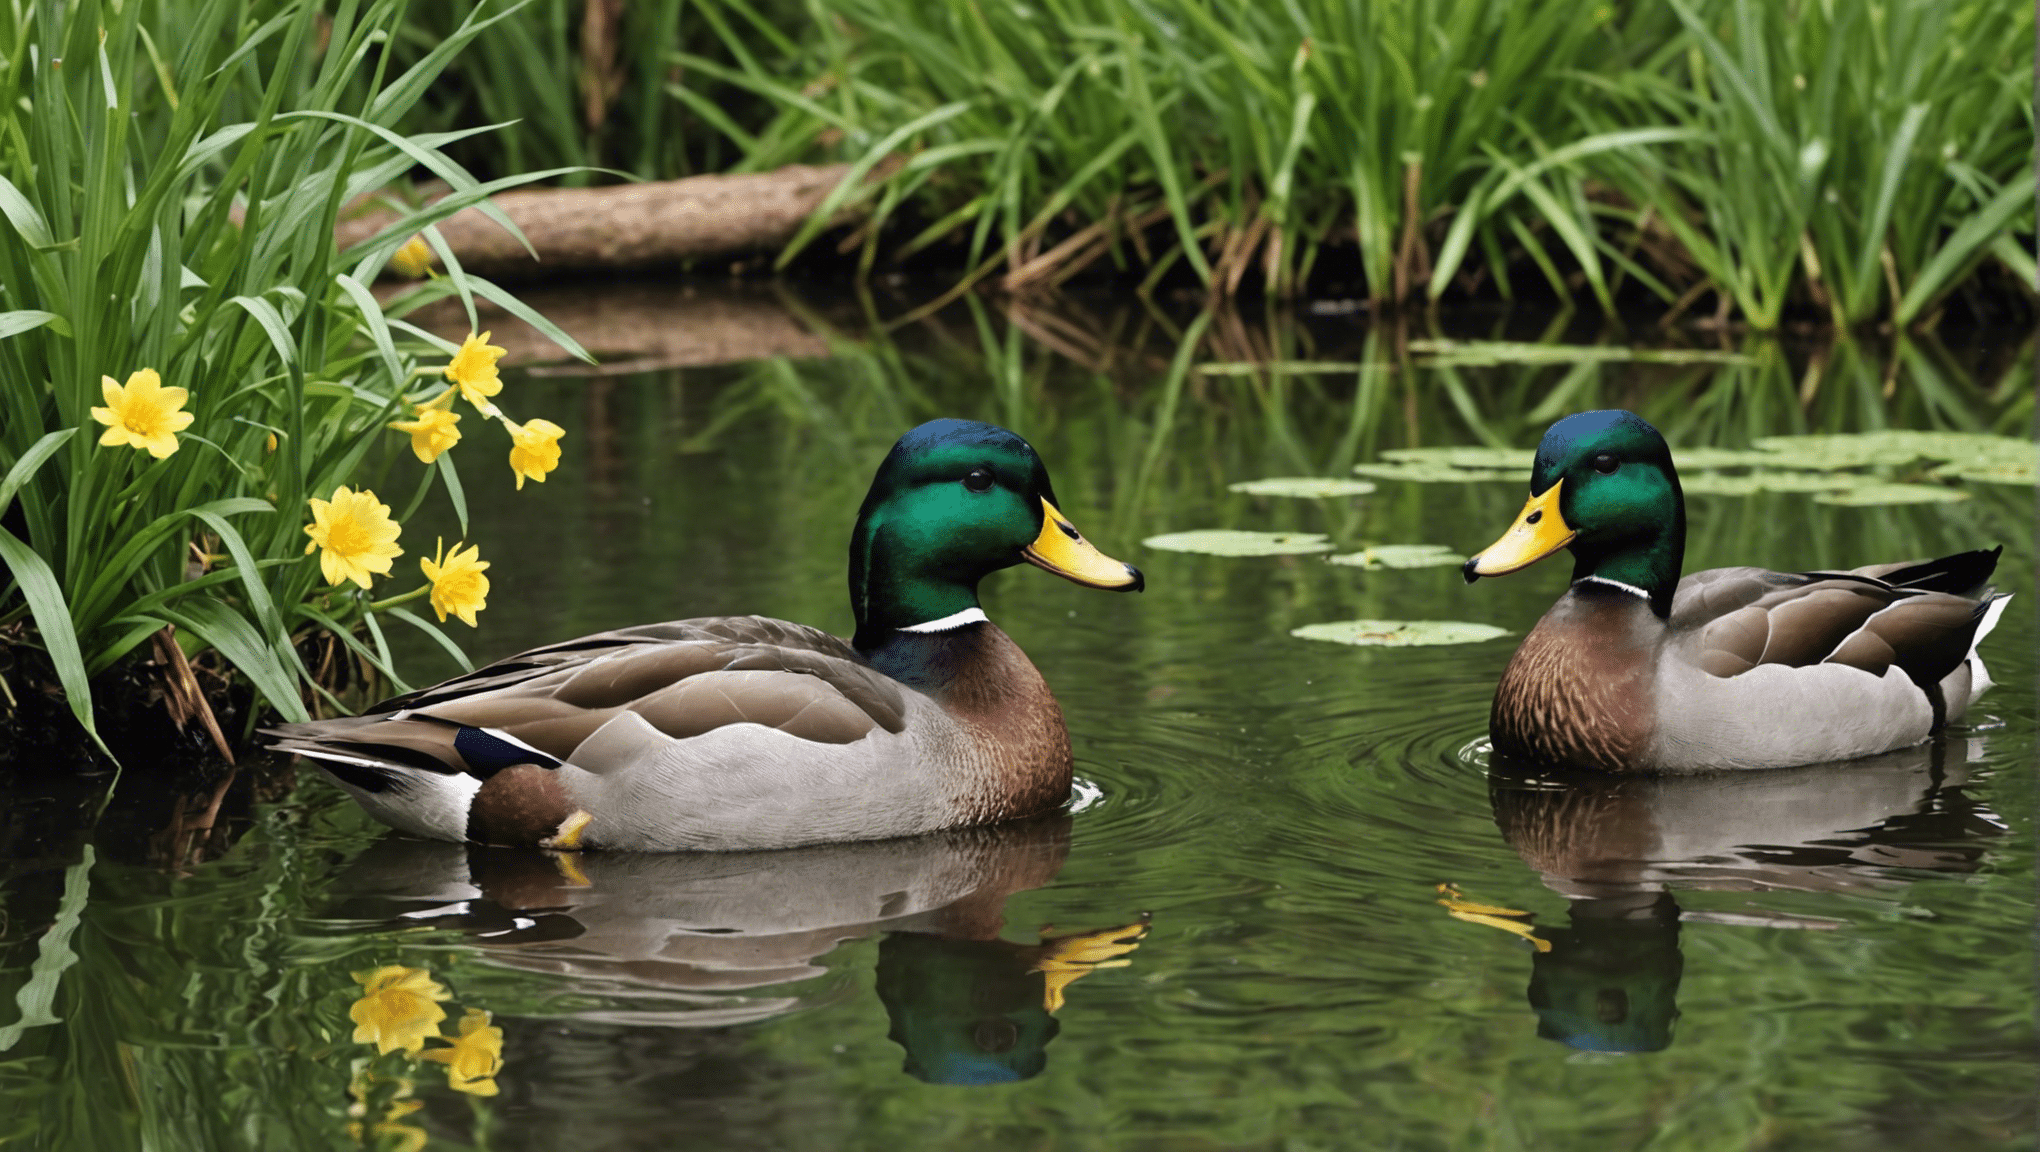 discover the perfect sanctuary for wild ducks and explore their natural haven with our informative guide.